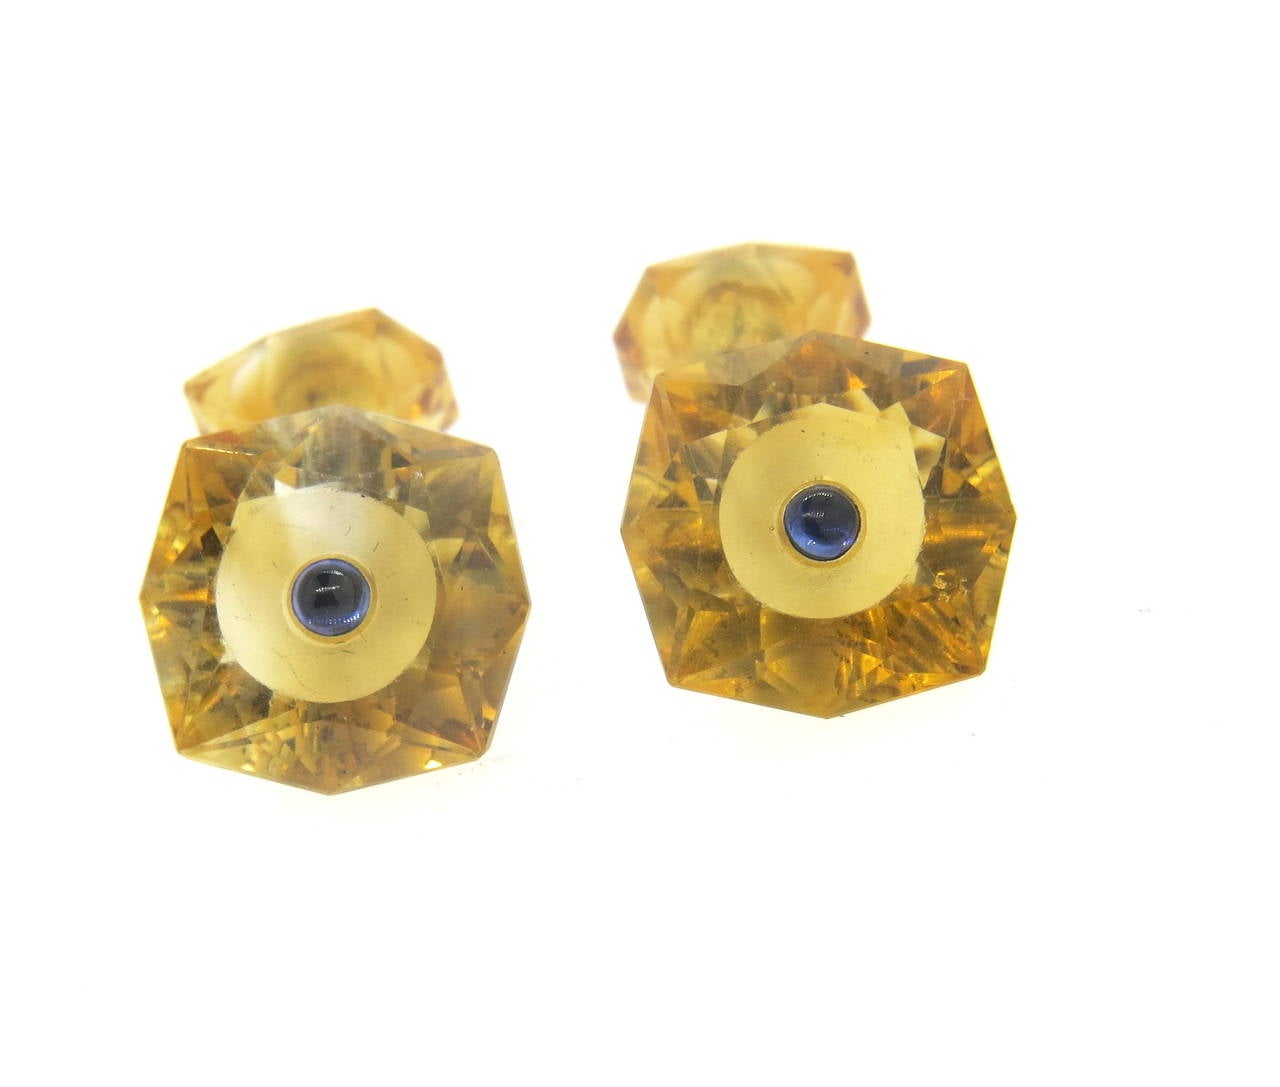 Pair of 14k yellow gold cufflinks, crafted by Trianon, decorated with faceted citrine top and blue sapphire cabochon in the center. Top measures 15mm x 15mm, back - 11mm x 11mn. Marked Trianon 14k . Weight - 6.1 grams
Retail $3100